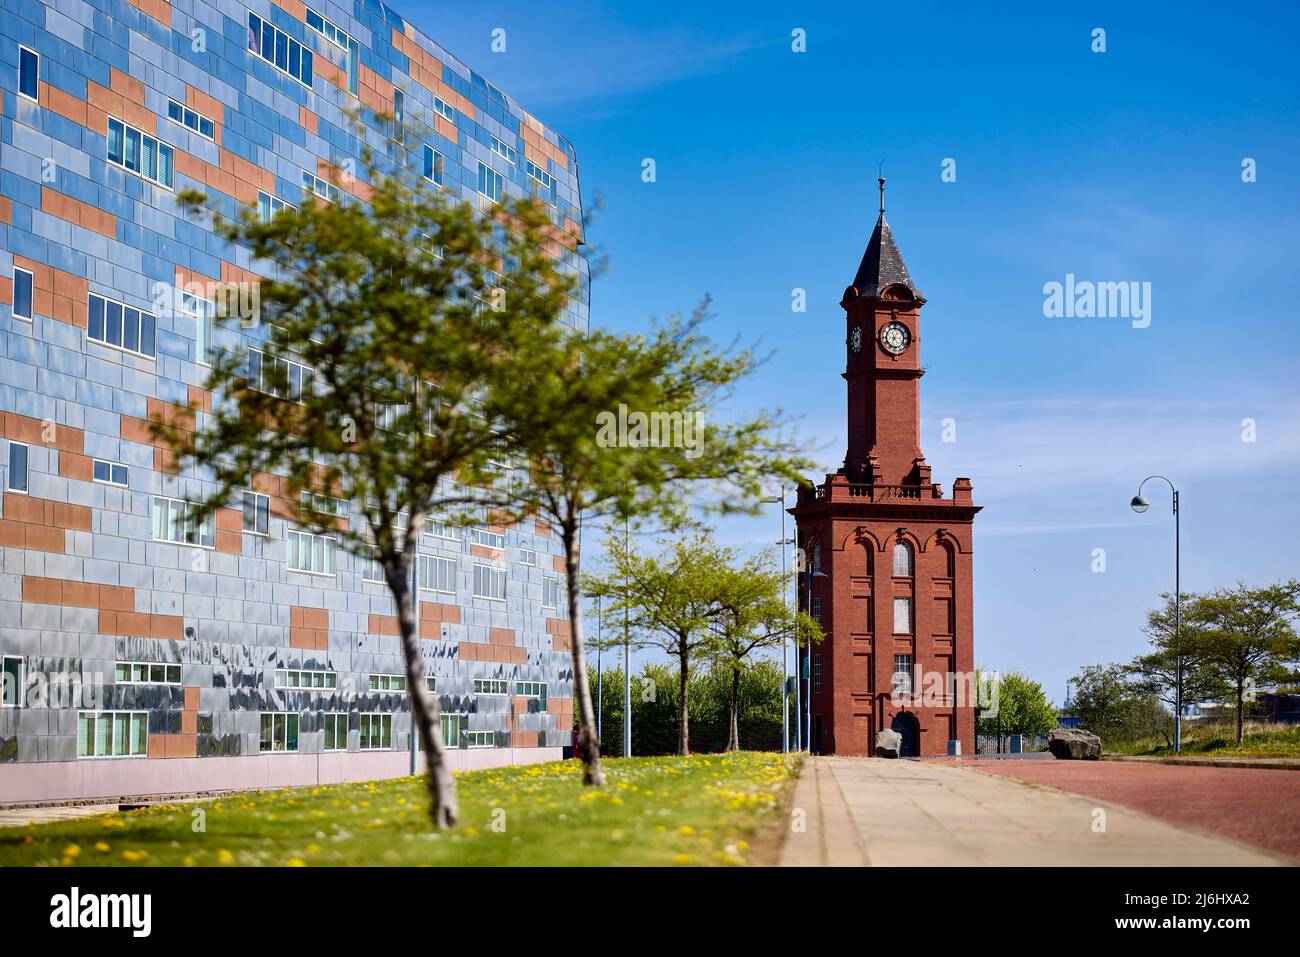 Torre dell'orologio a Middlehaven Middlesbrough Foto Stock